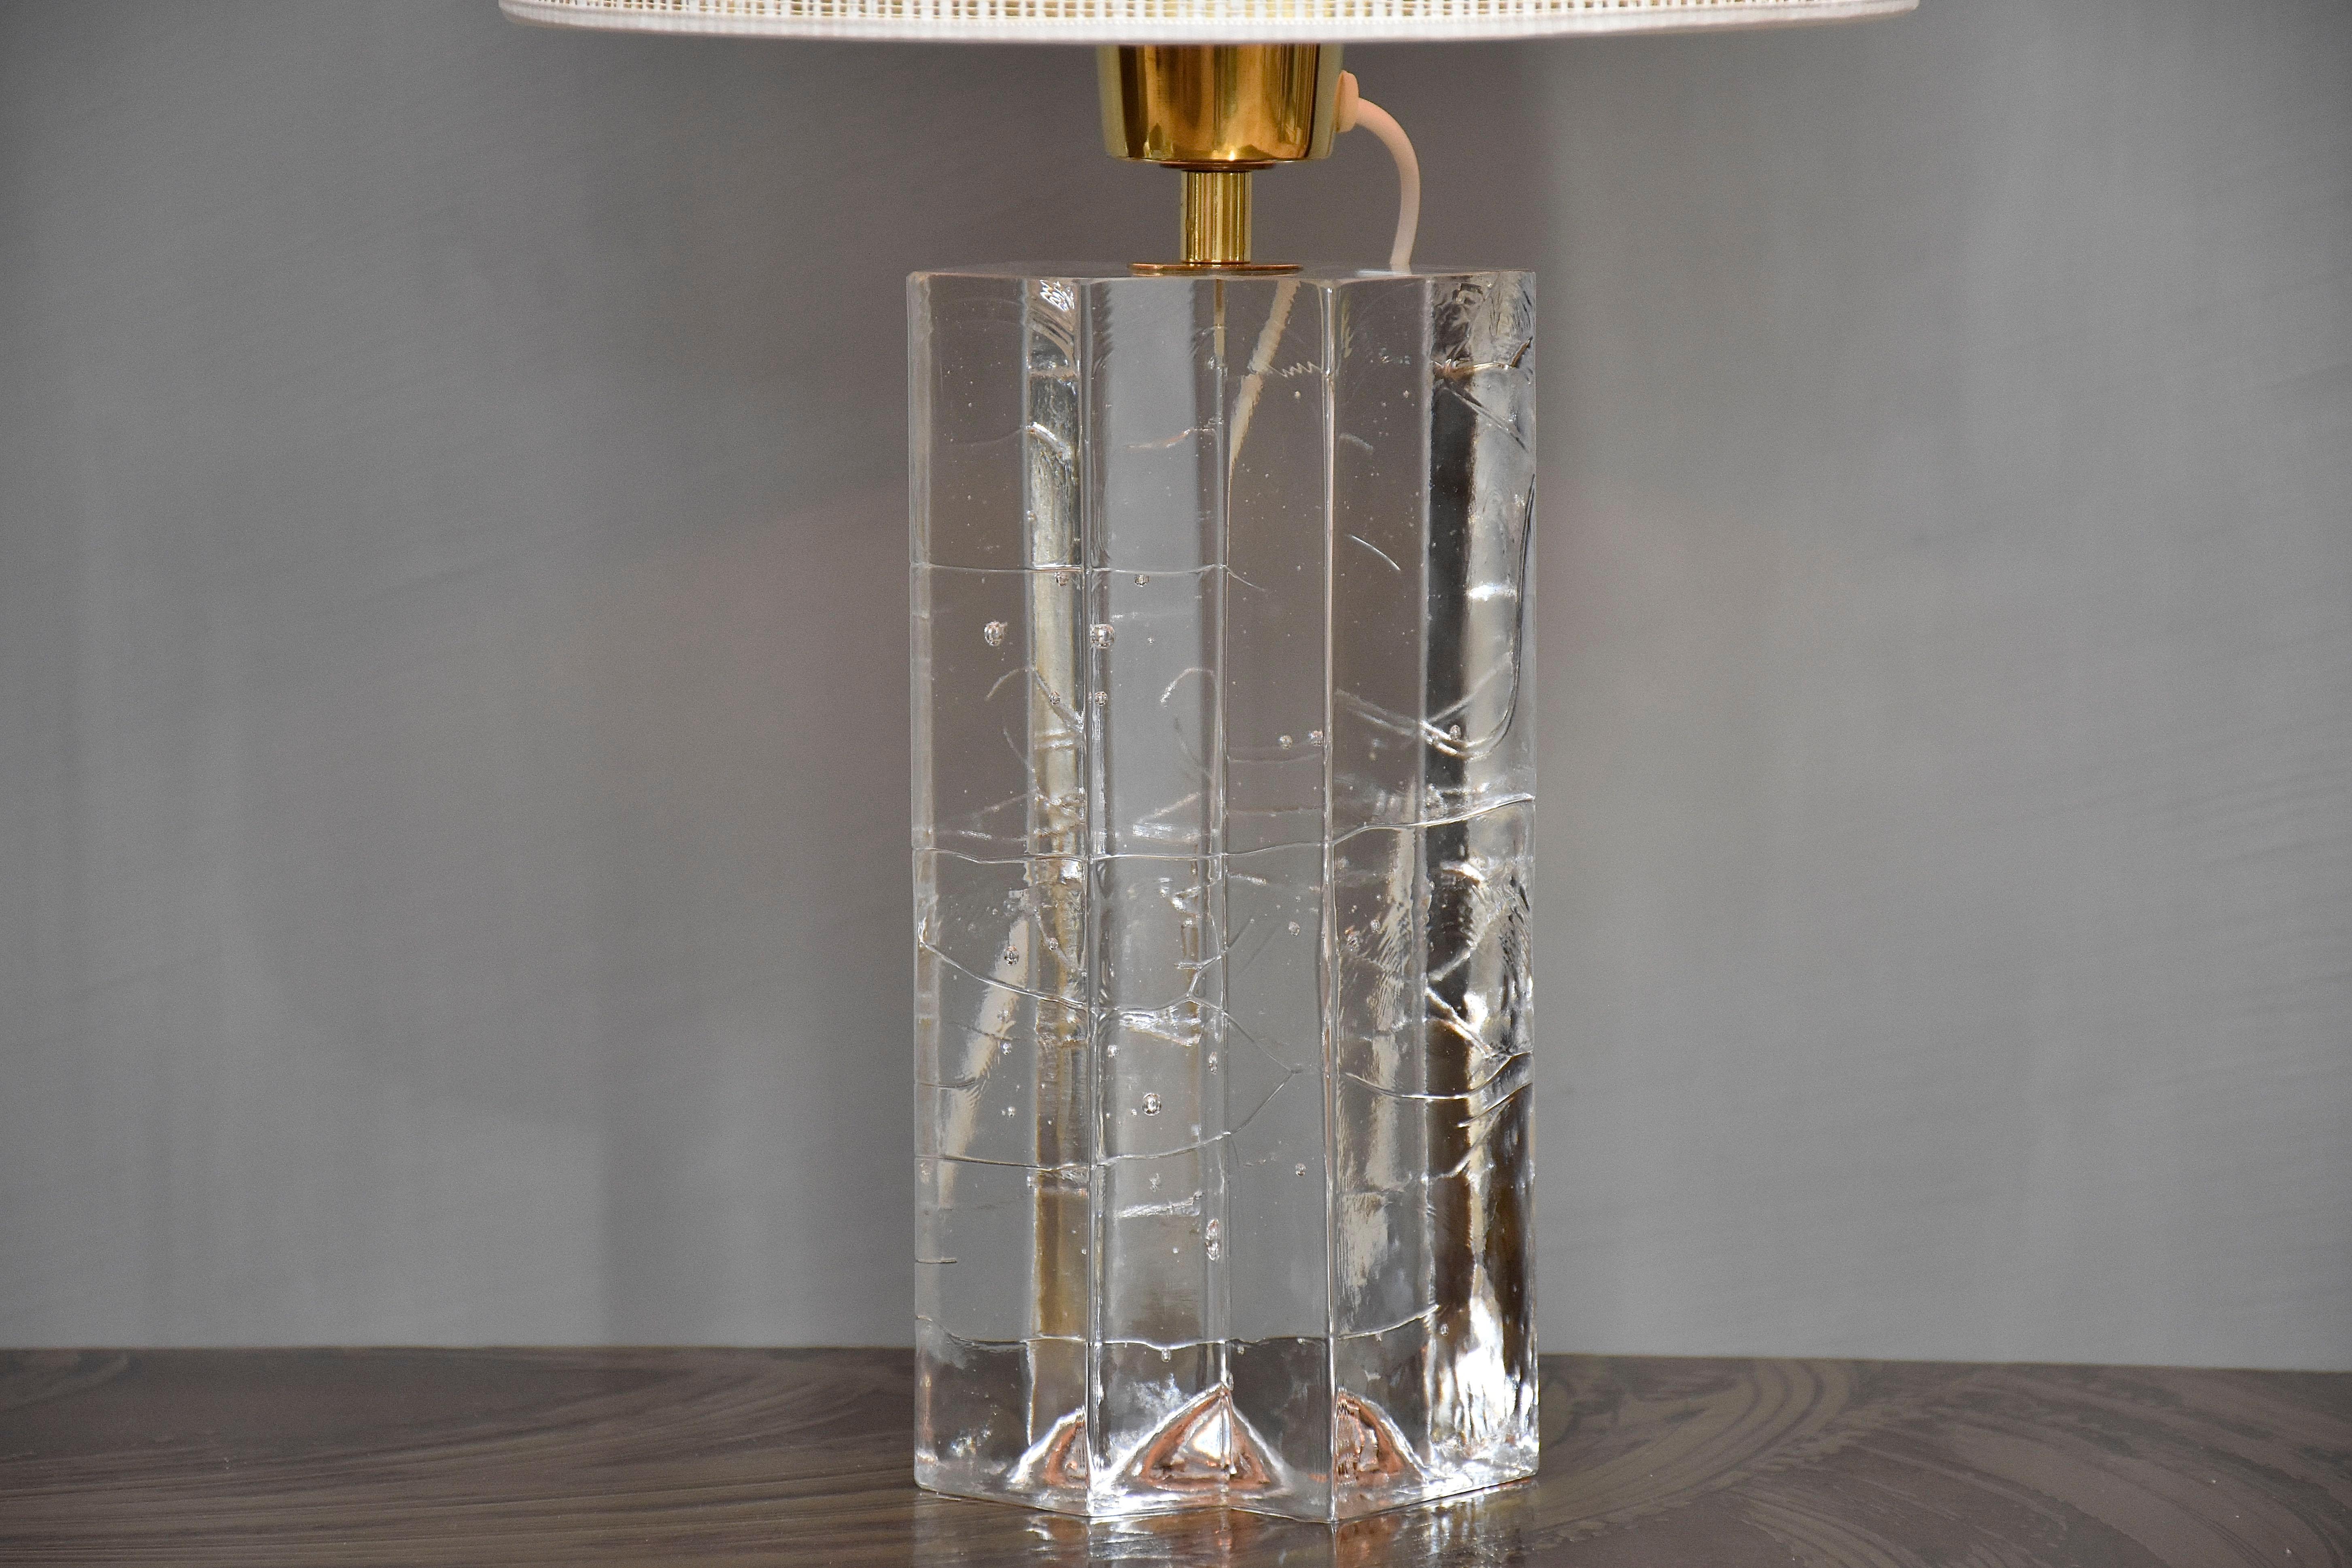 Stunning and very unique table lamp model 'Arkipelago' by Finnish glass designer and sculptor Timo Sarpaneva (1926-2006)
Solid mold-blown glass base with bubbles and brass elements.
Periode- ca. 1970-1979
Produced by Littala
Place of origin-